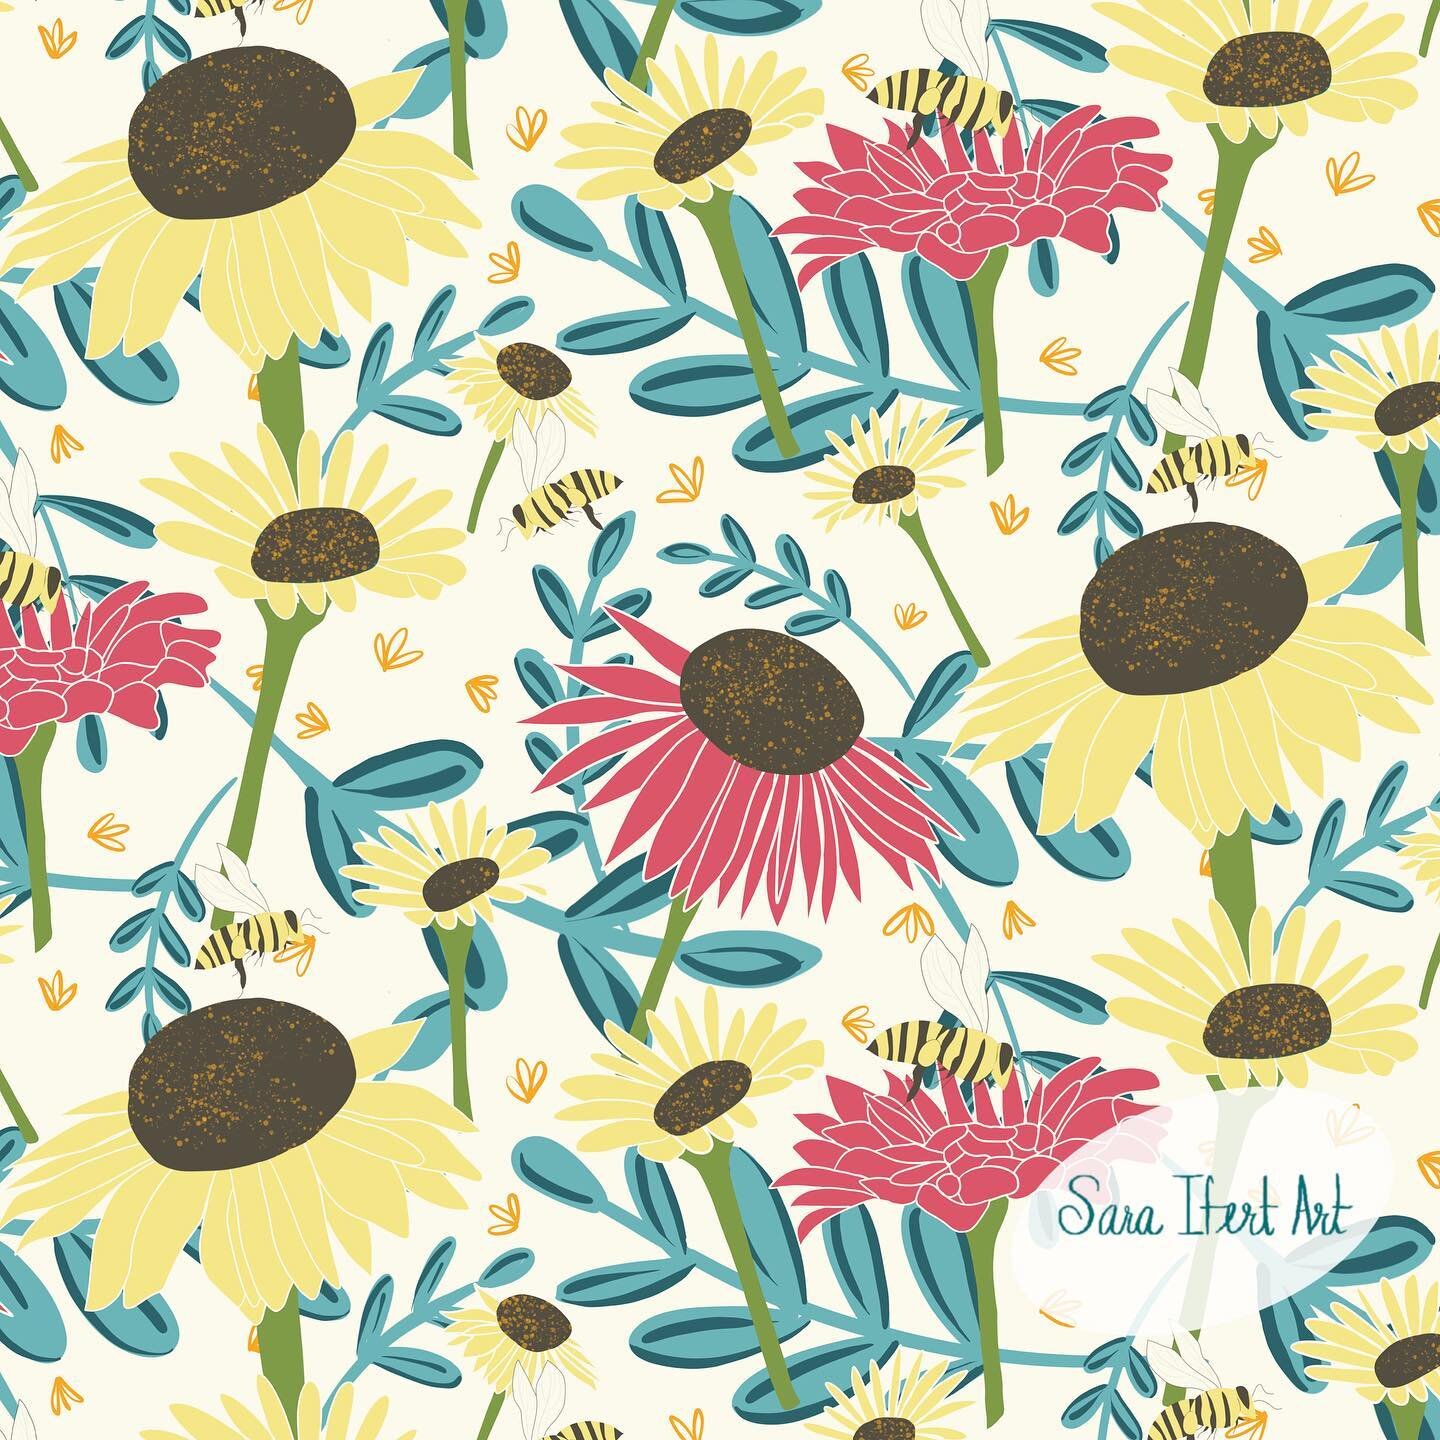 My bees &amp; flowers inspired design I just submitted for the @blueprintshows and @makeitindesign competition! How could I NOT participate in a design competition focused on raising awareness about our pollinators?? 🐝 🌺